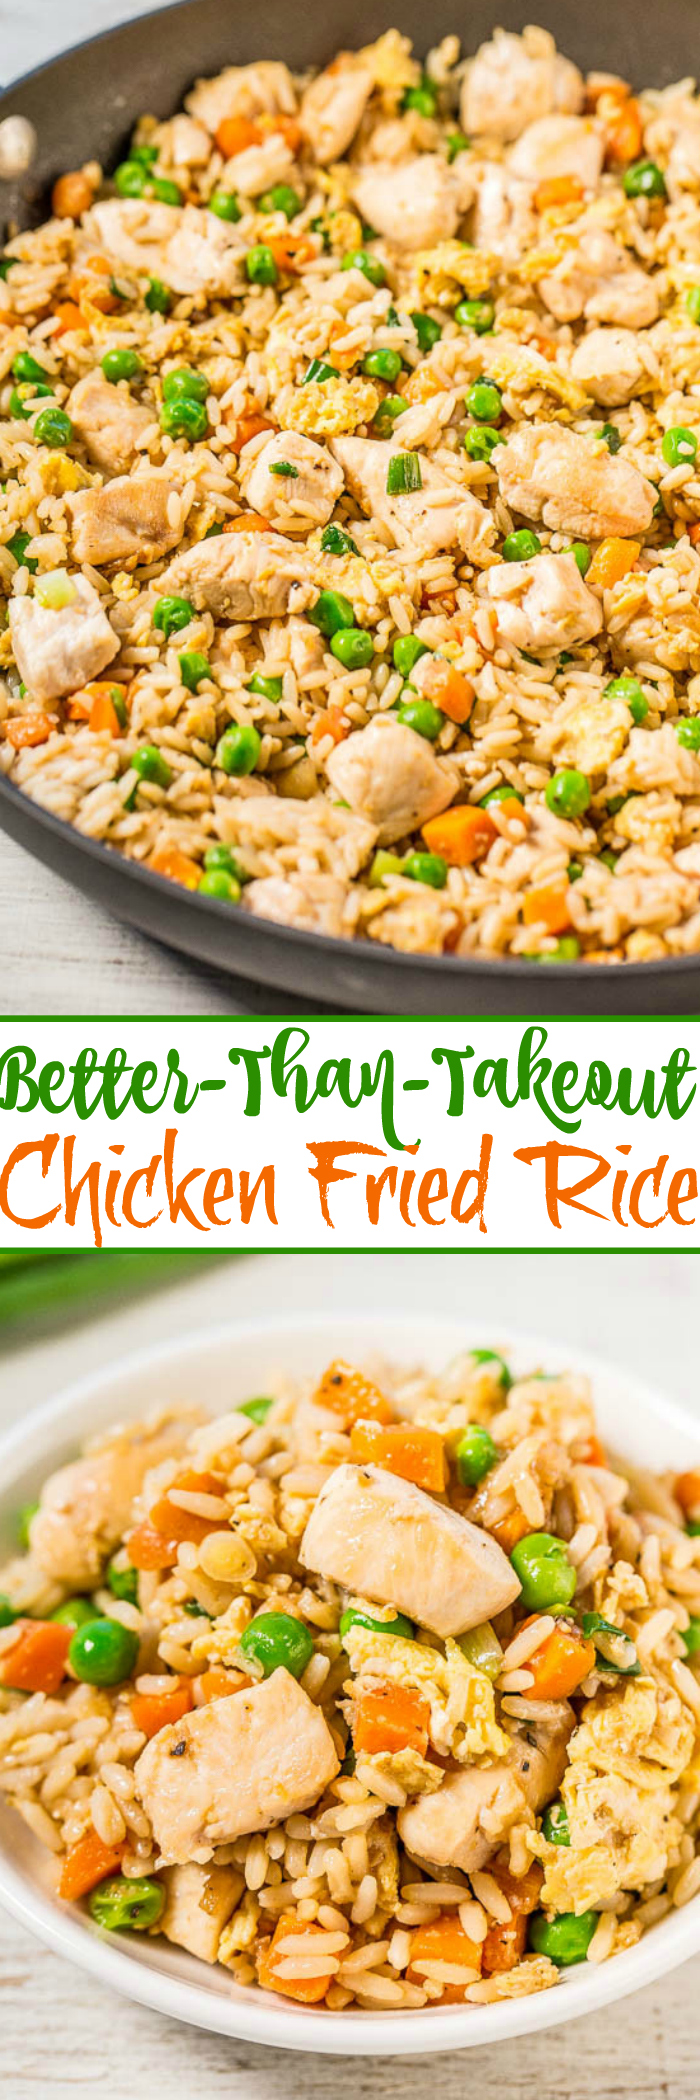 Easy Better-Than-Takeout Chicken Fried Rice - One-skillet, ready in 20 minutes, and you'll never want takeout again after tasting how good homemade is!! Way more flavor, not greasy, and loads of juicy chicken!!